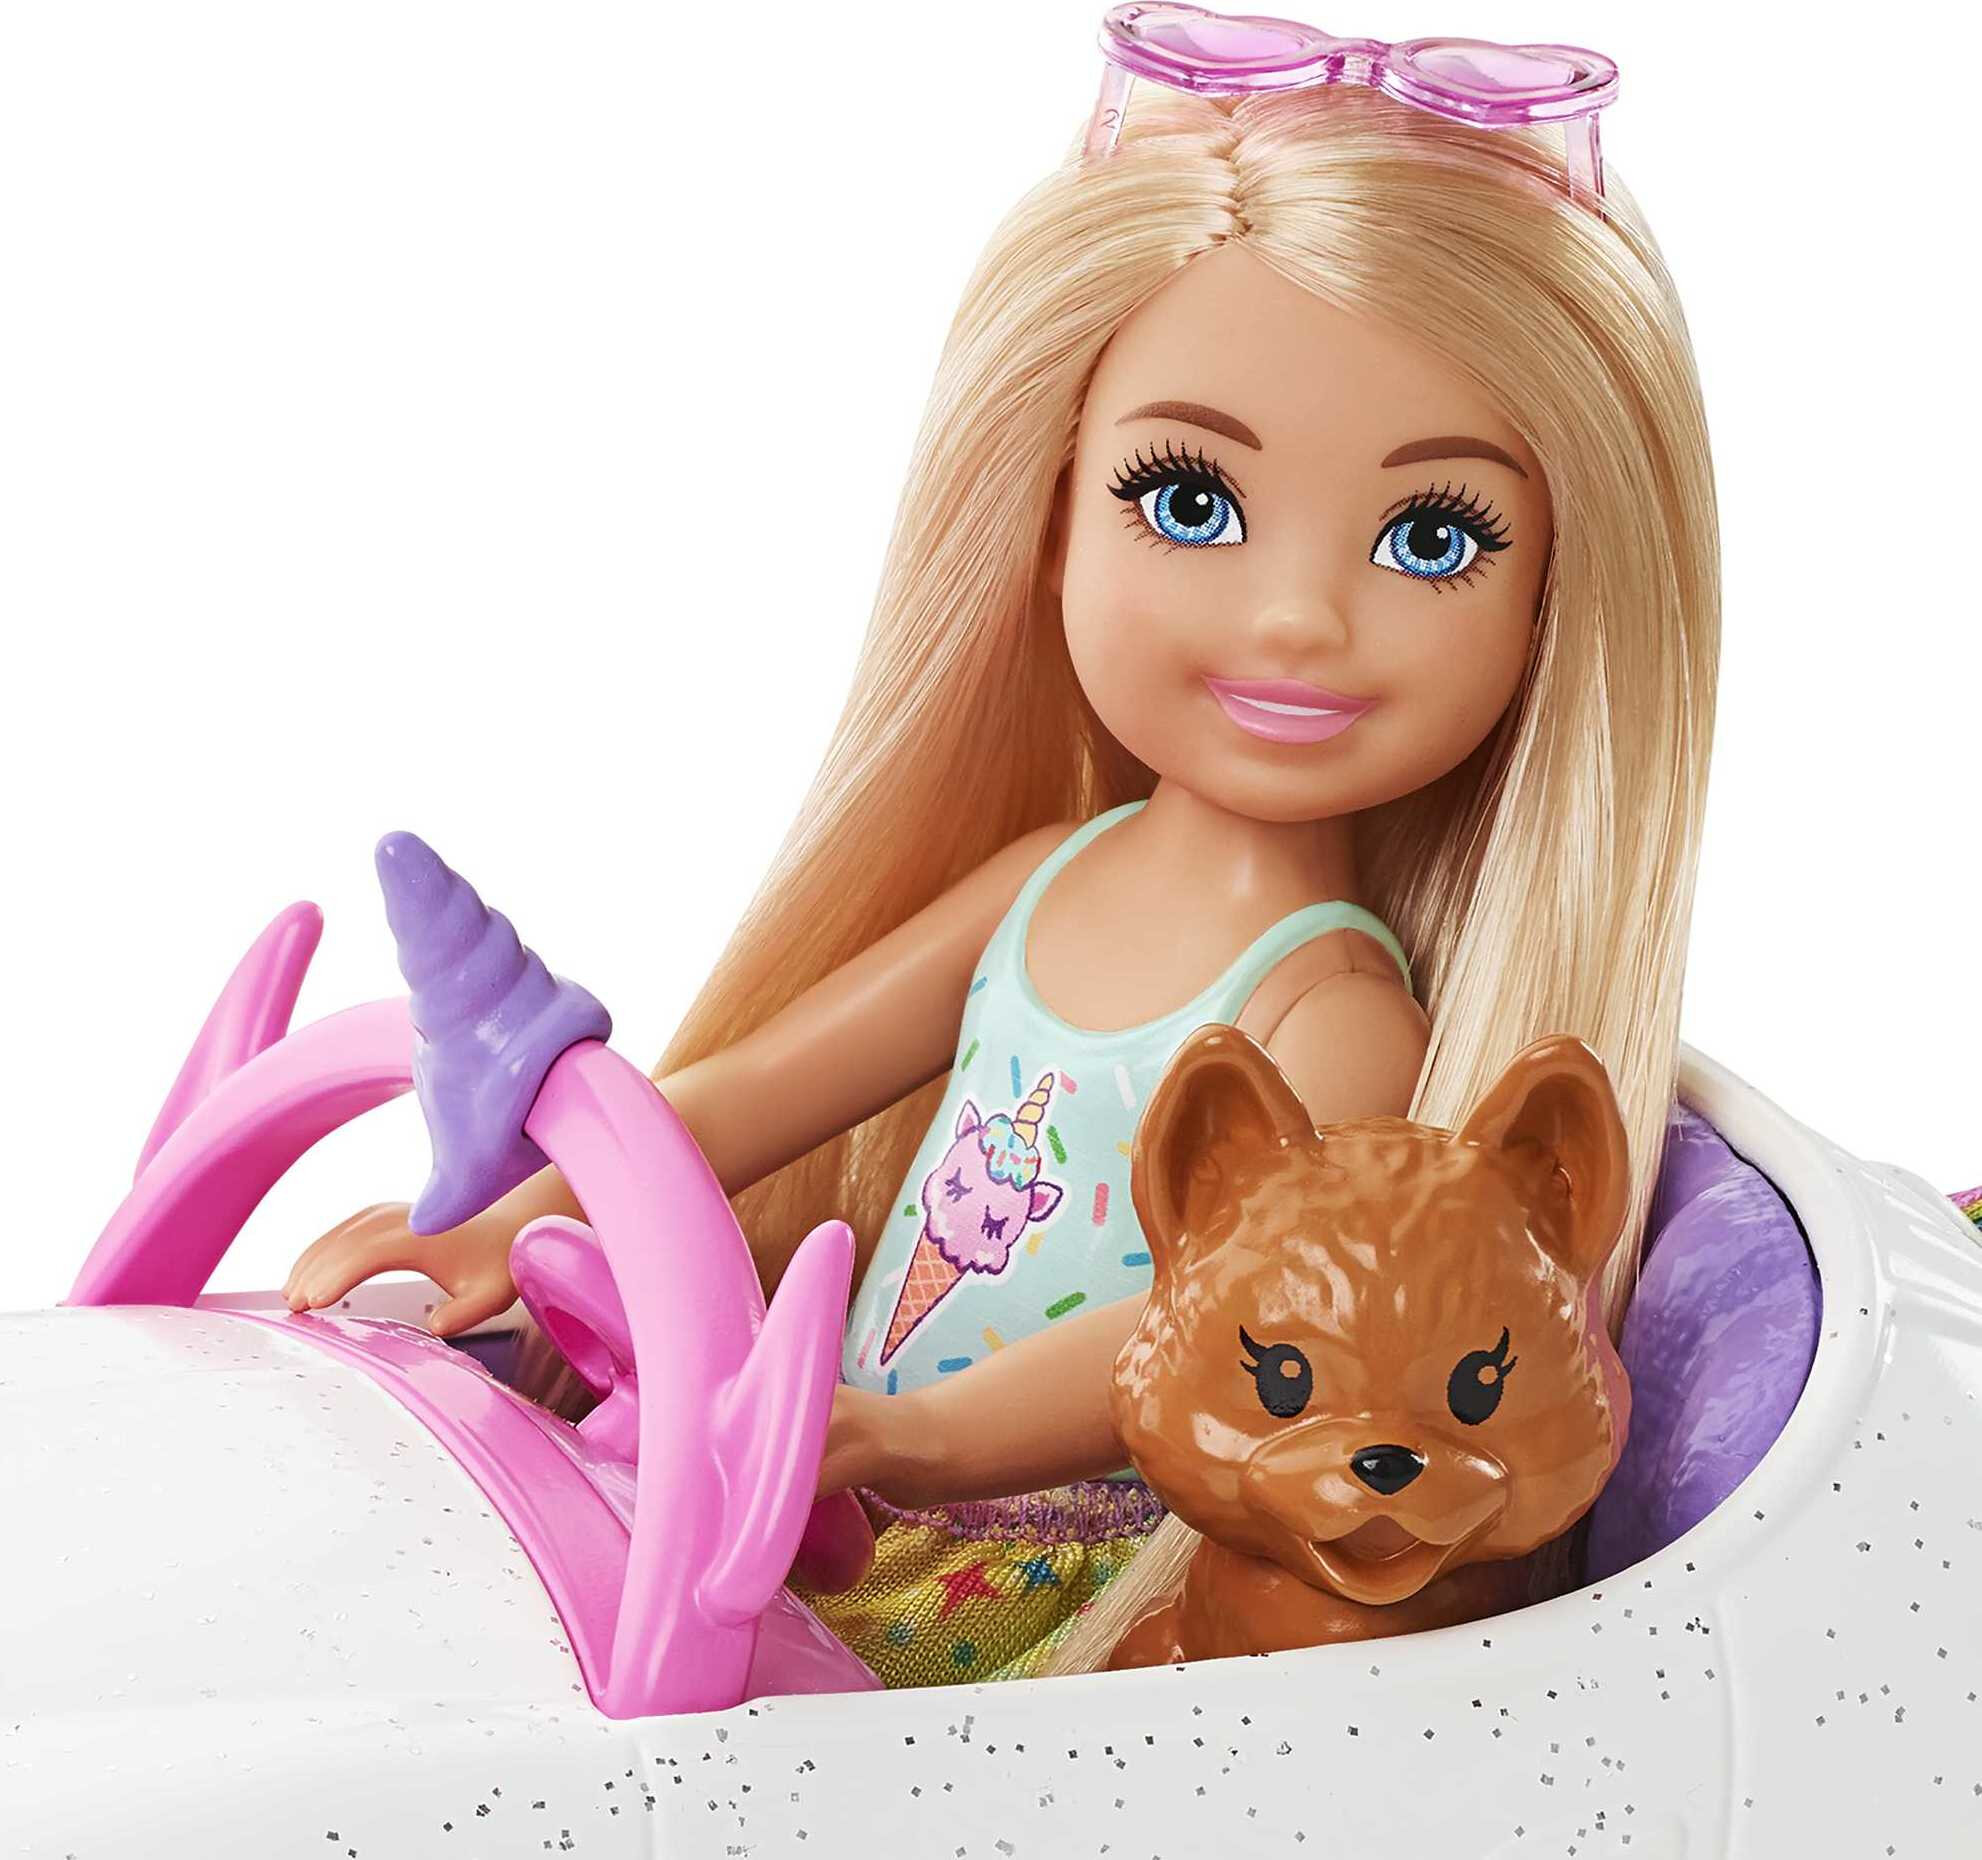 Barbie Club Chelsea Doll & Toy Car, Unicorn Theme, Blonde Small Doll, Puppy, Stickers & Accessories - image 5 of 6